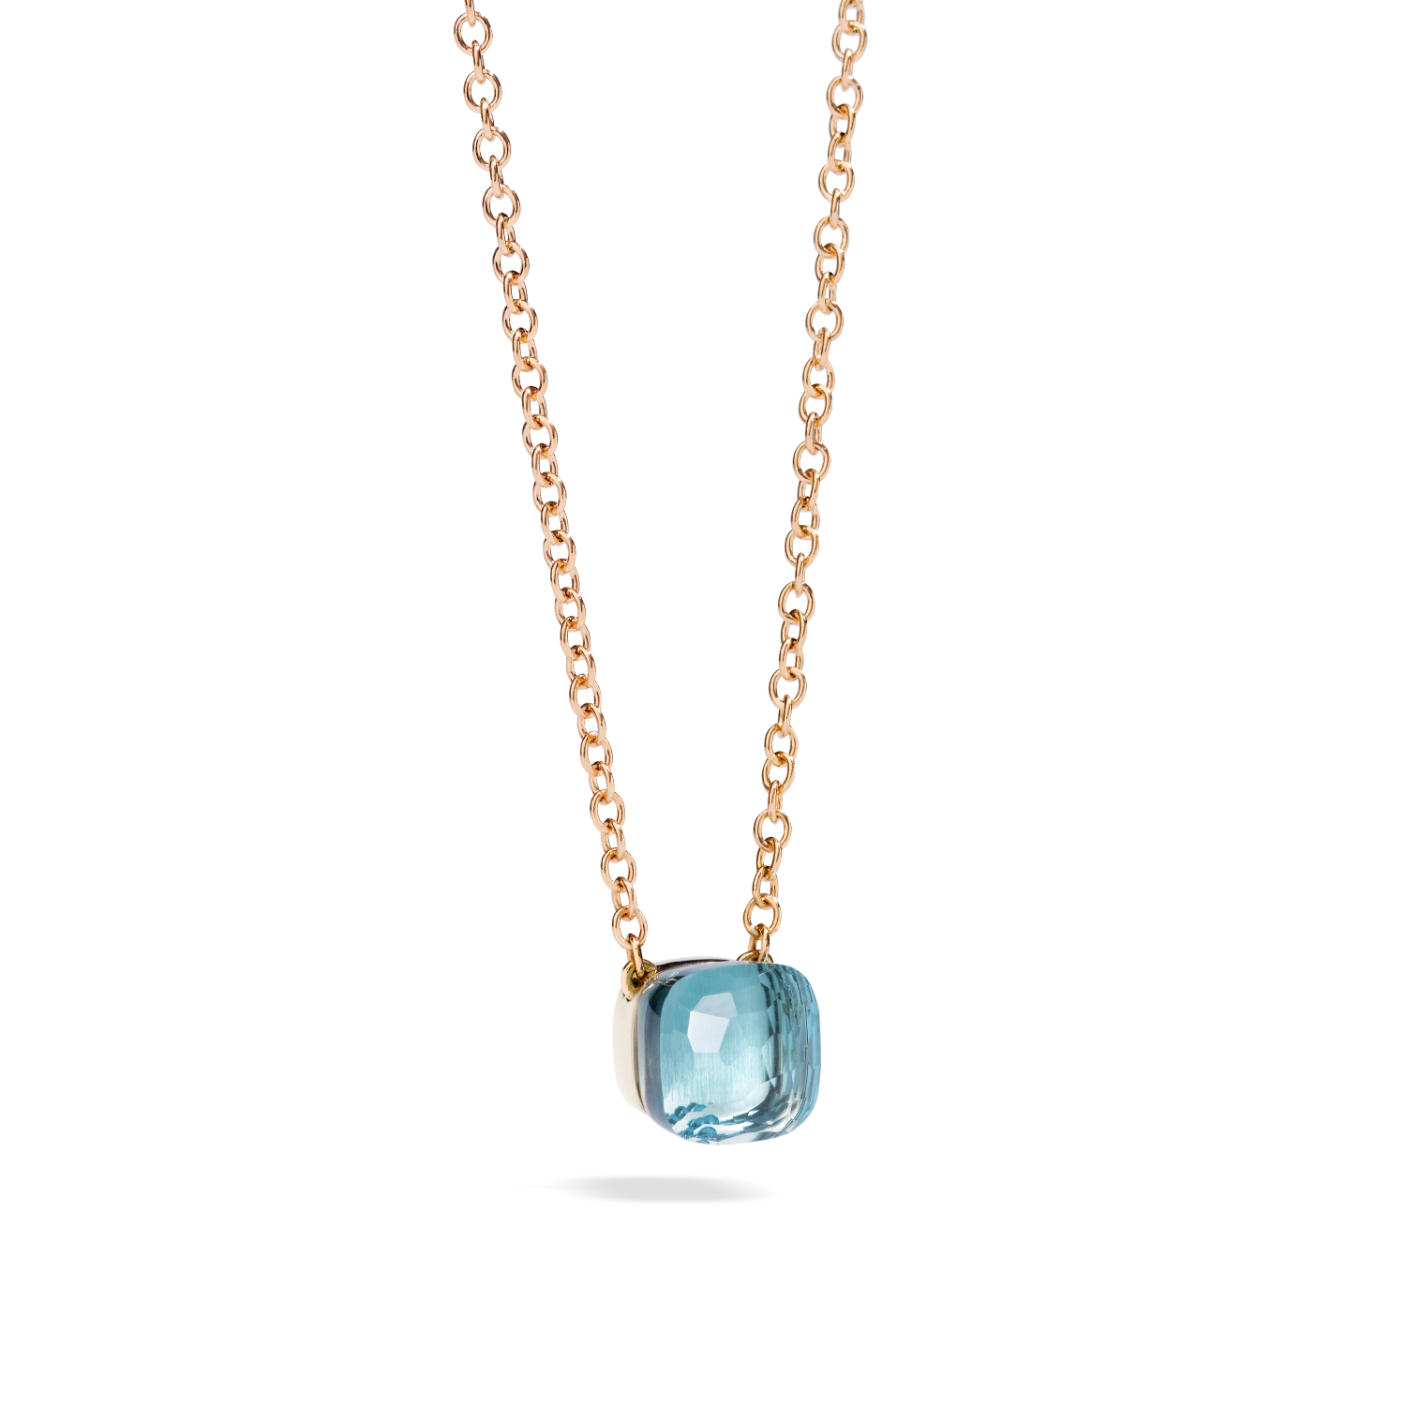 PCB6010_O6000_000OY_010_Pomellato_pendant-with-chain-nudo-rose-gold-18kt-white-gold-18kt-blue-topaz.png